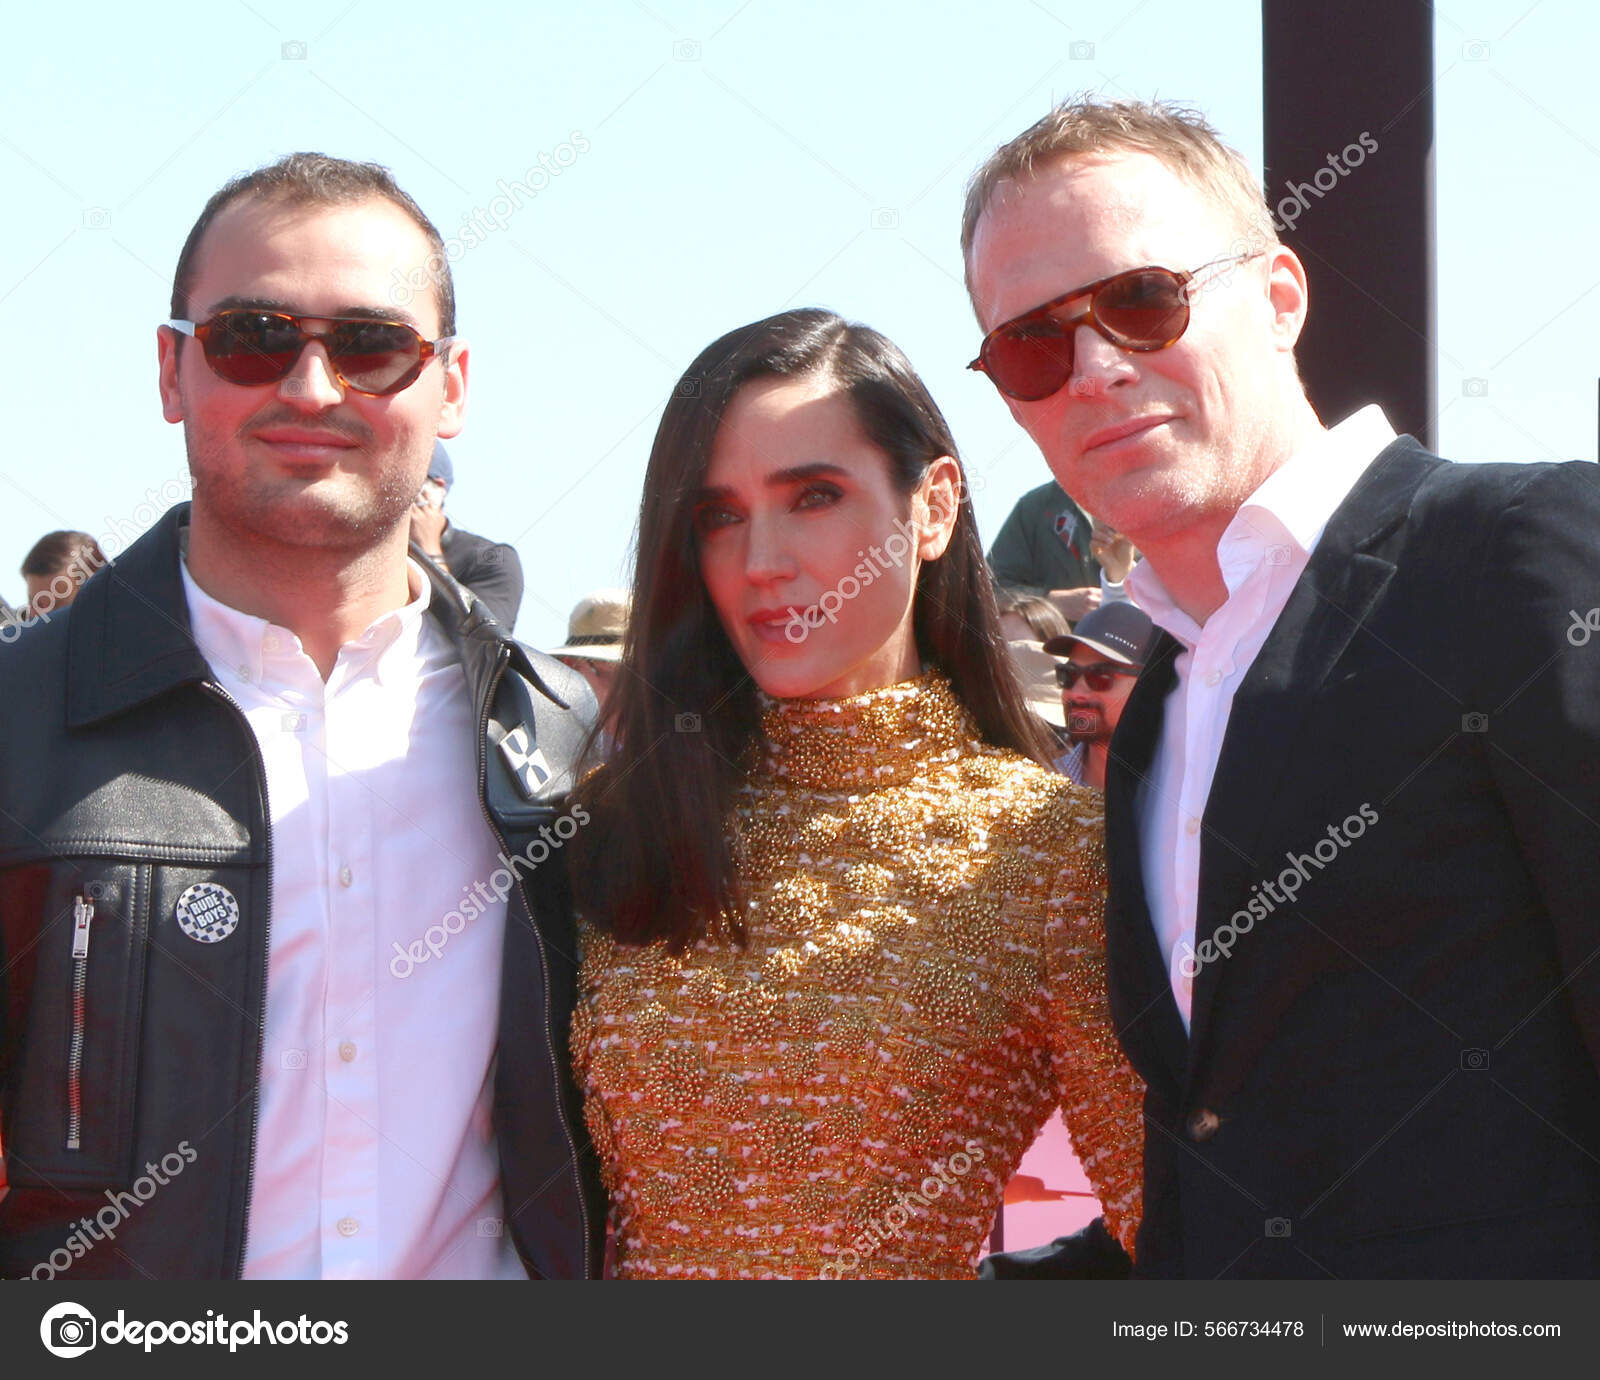 Paul Bettany and Jennifer Connelly Might Be the World's Best